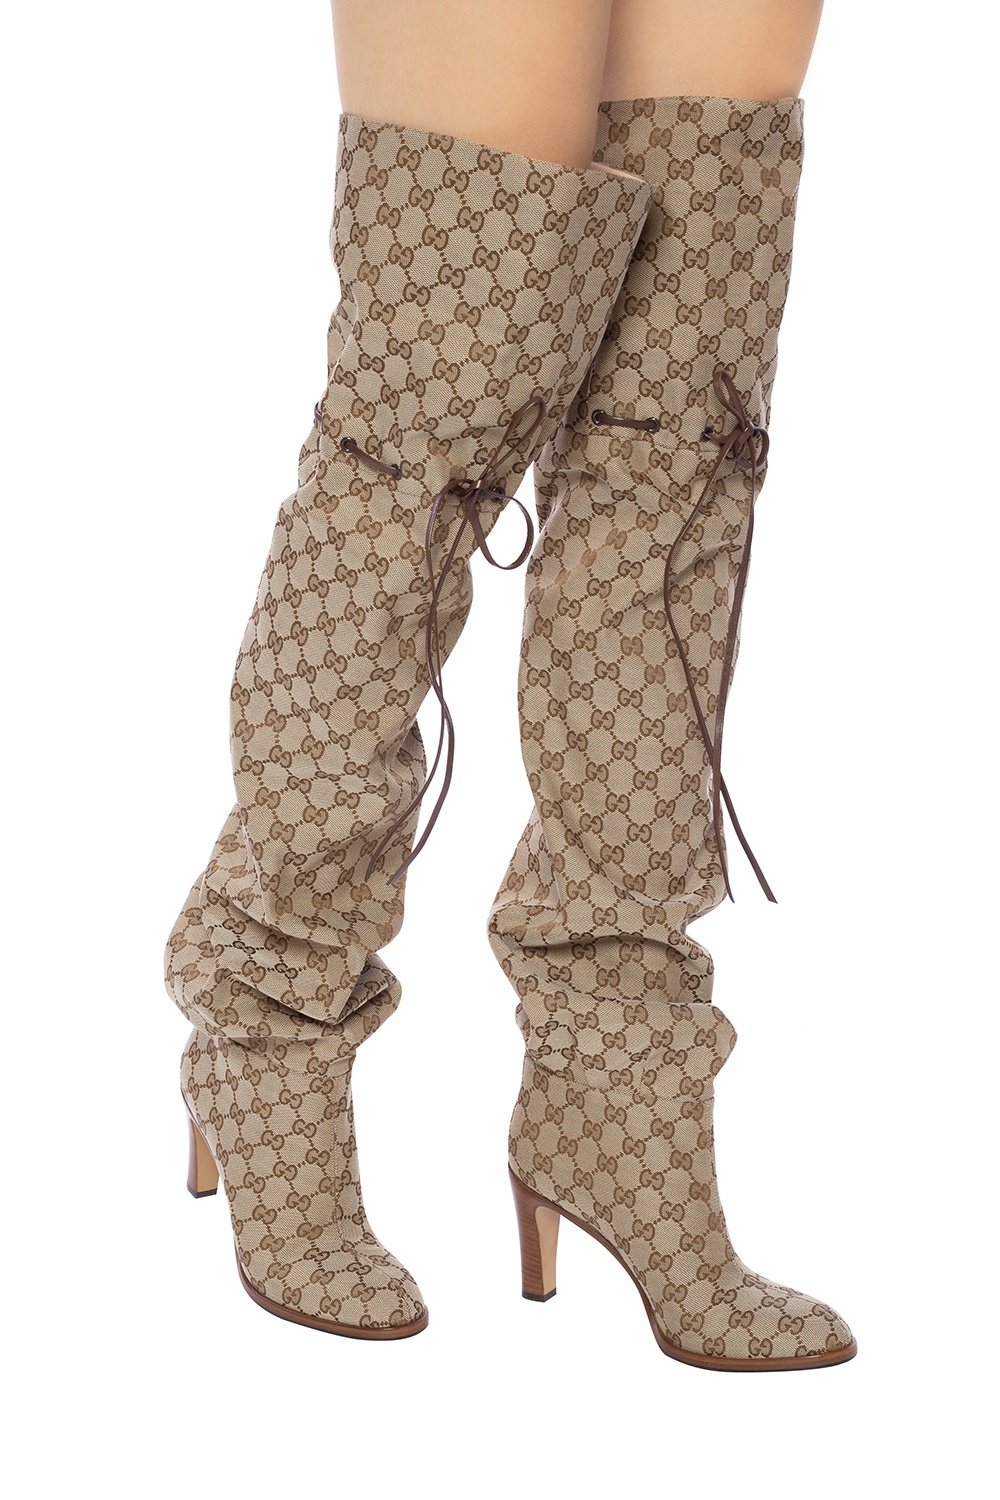 Gucci Heeled thigh-high boots, Women's Shoes